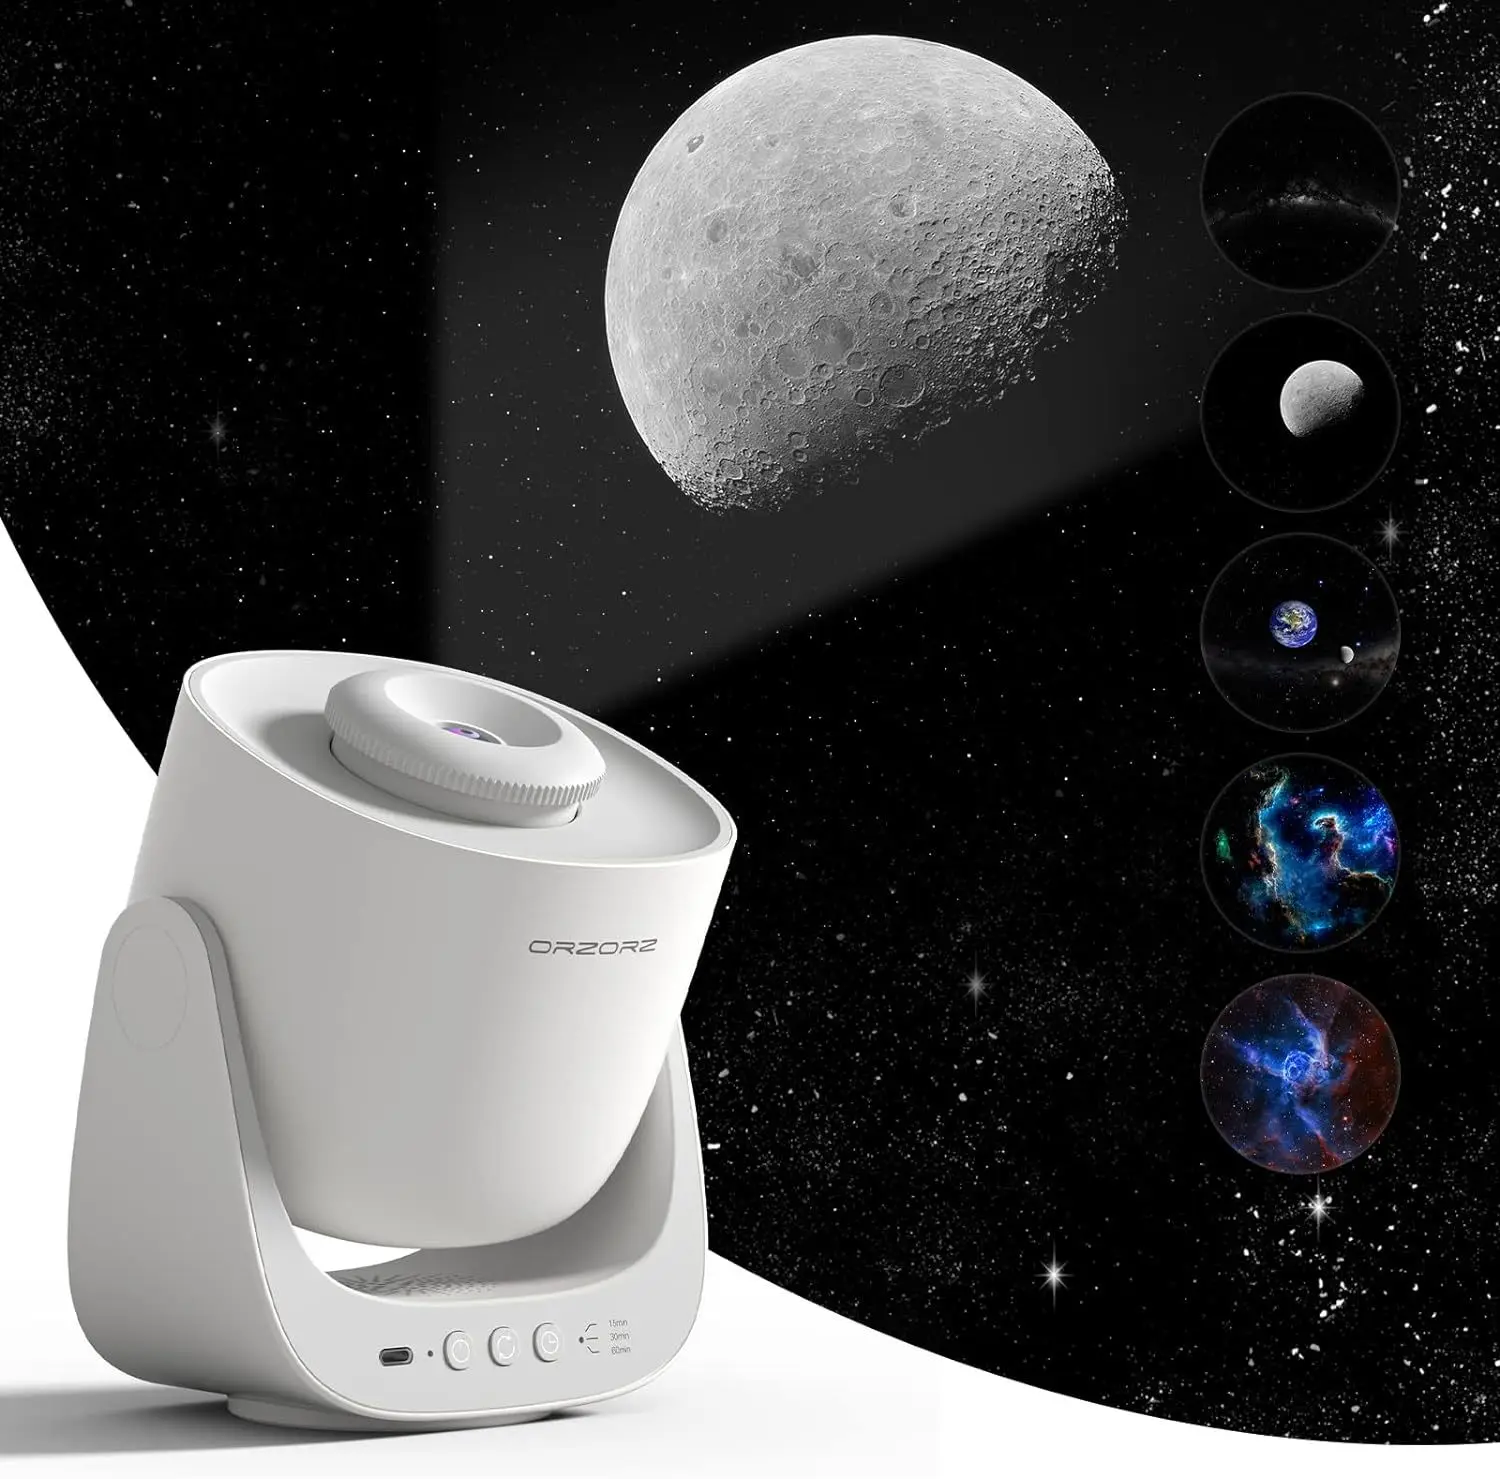 

AMOBOX Bluetooth Star Projector,Star Projector for Night Sky,Planetarium Projector Light/Lamp for Kid,Home, Bedroom,Real Feeling